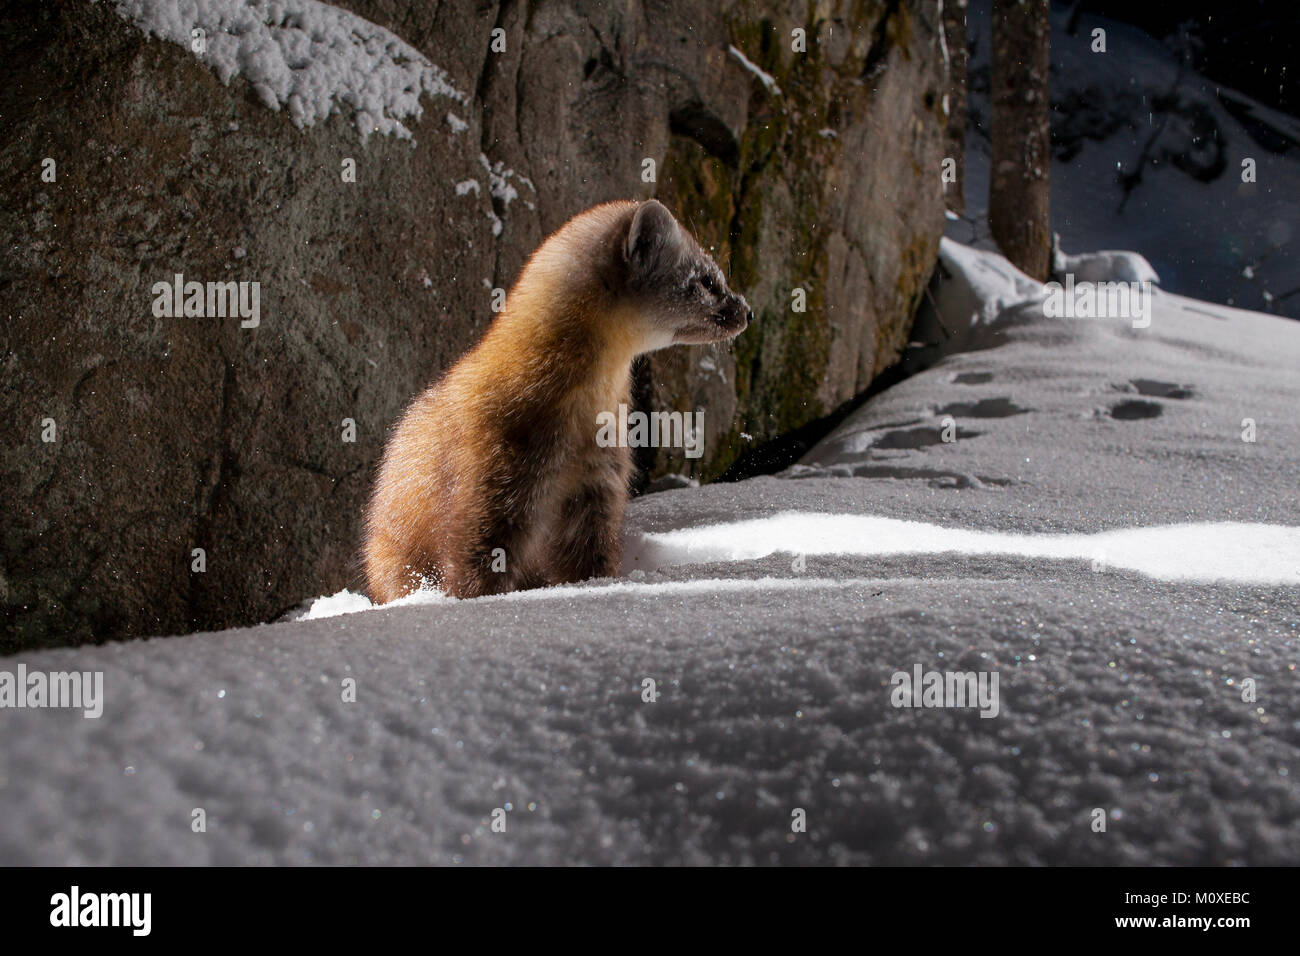 MAYNOOTH, ONTARIO, CANADA - January 22, 2018: A marten (Martes americana), part of the Weasel family / Mustelidae forages for food. Stock Photo